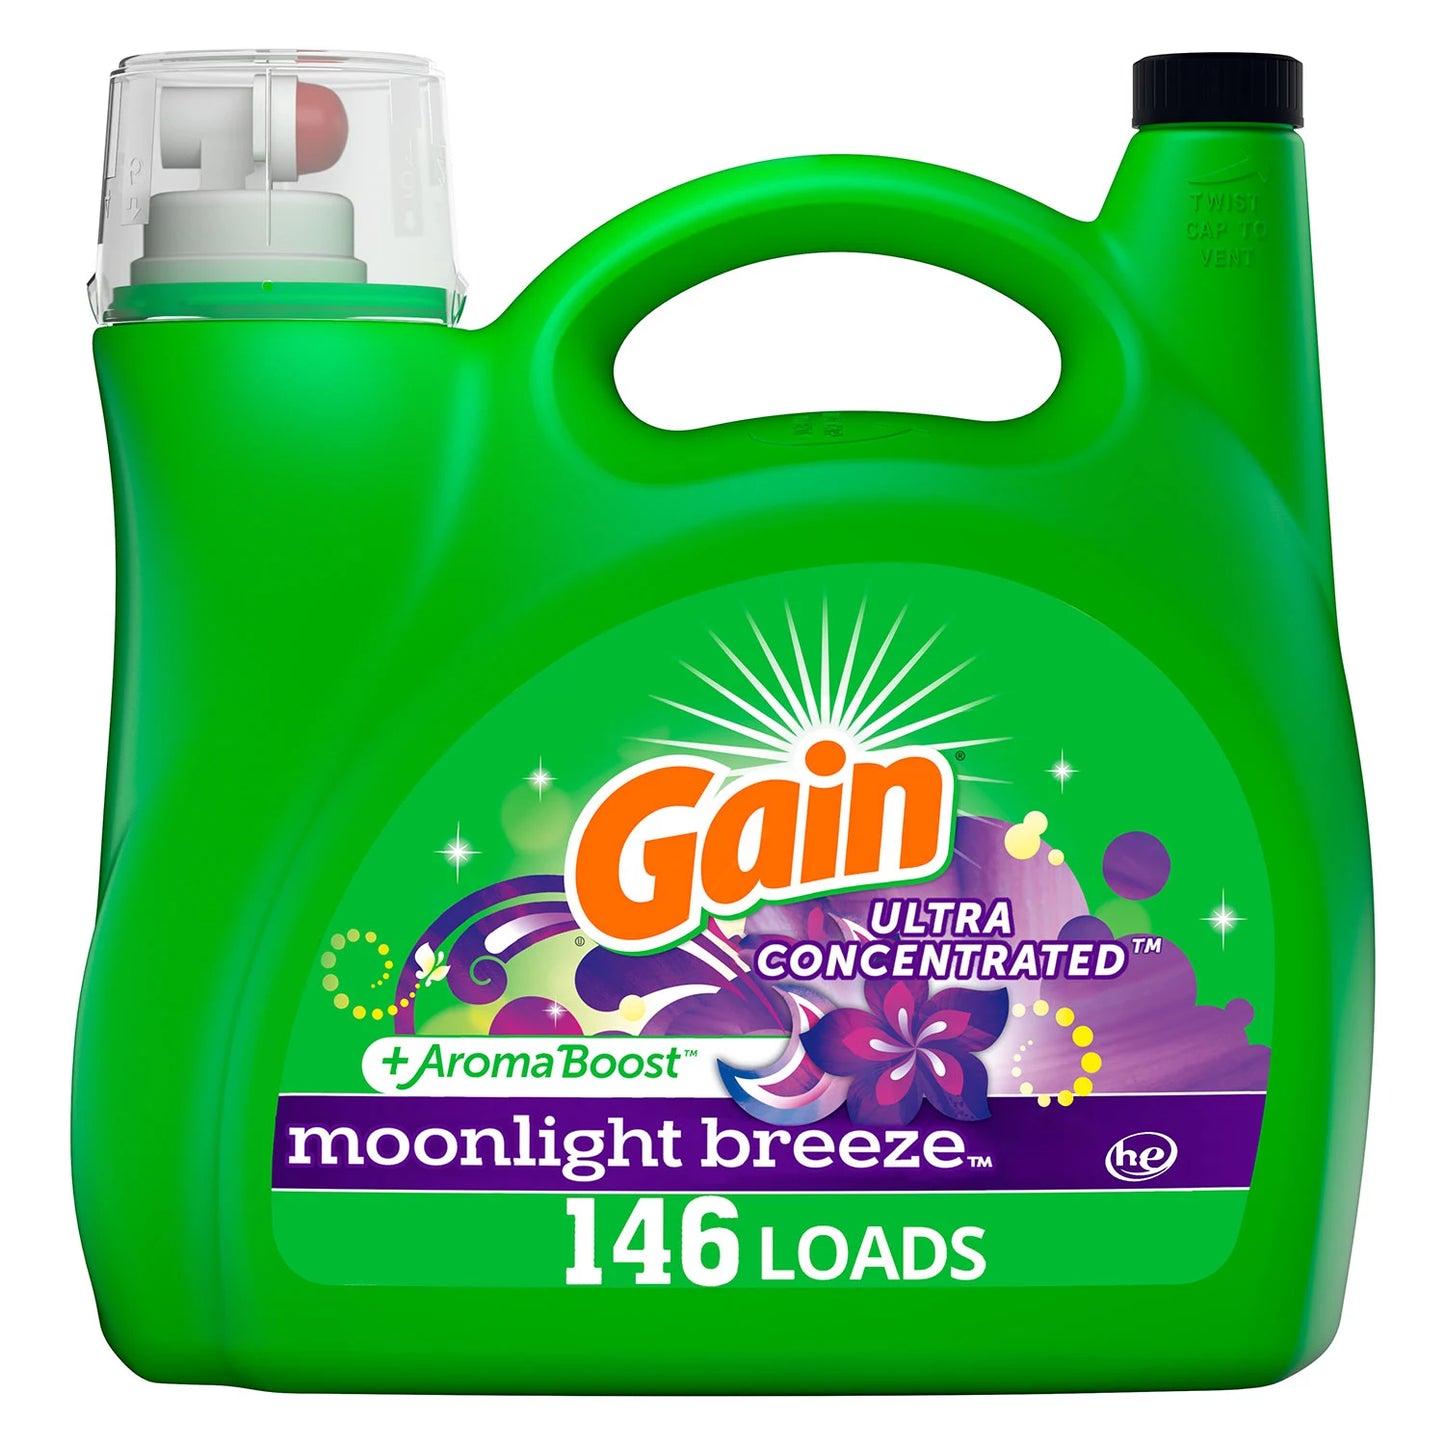 Gain Ultra Concentrated +AromaBoost HE Liquid Laundry Detergent, Original, 146 Loads, 200 fl oz